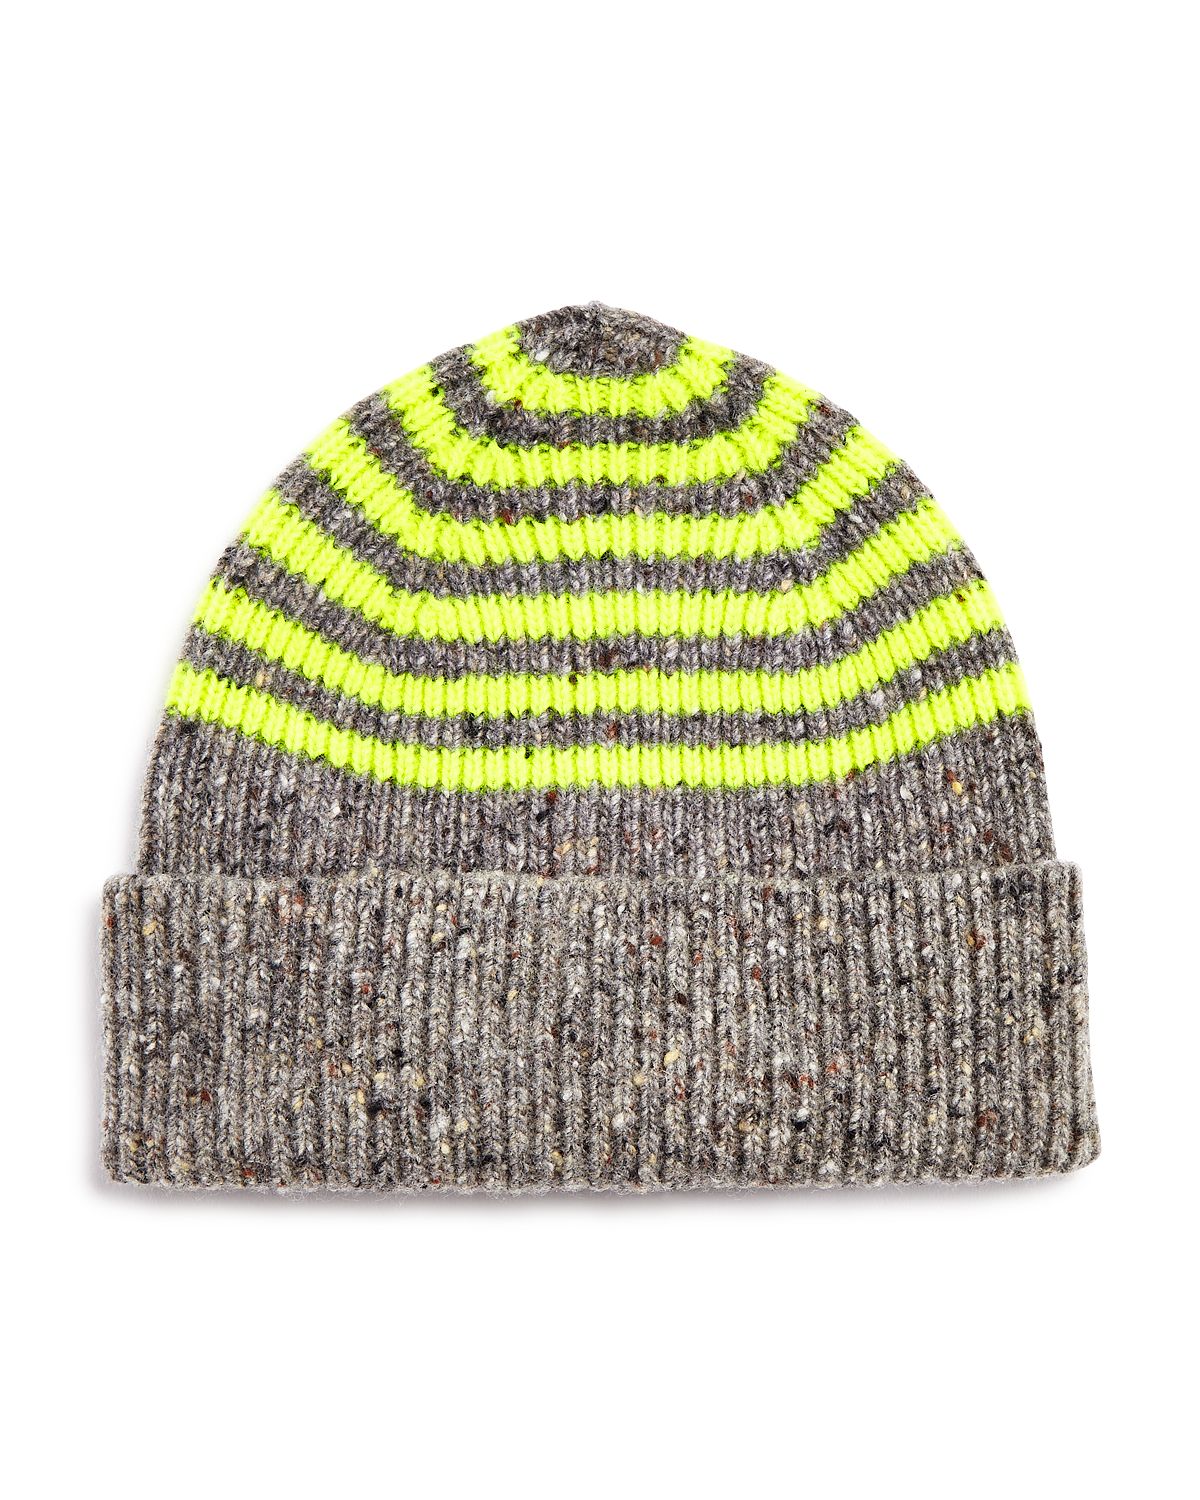 Paul Smith Neon-striped Beanie Gray and Yellow